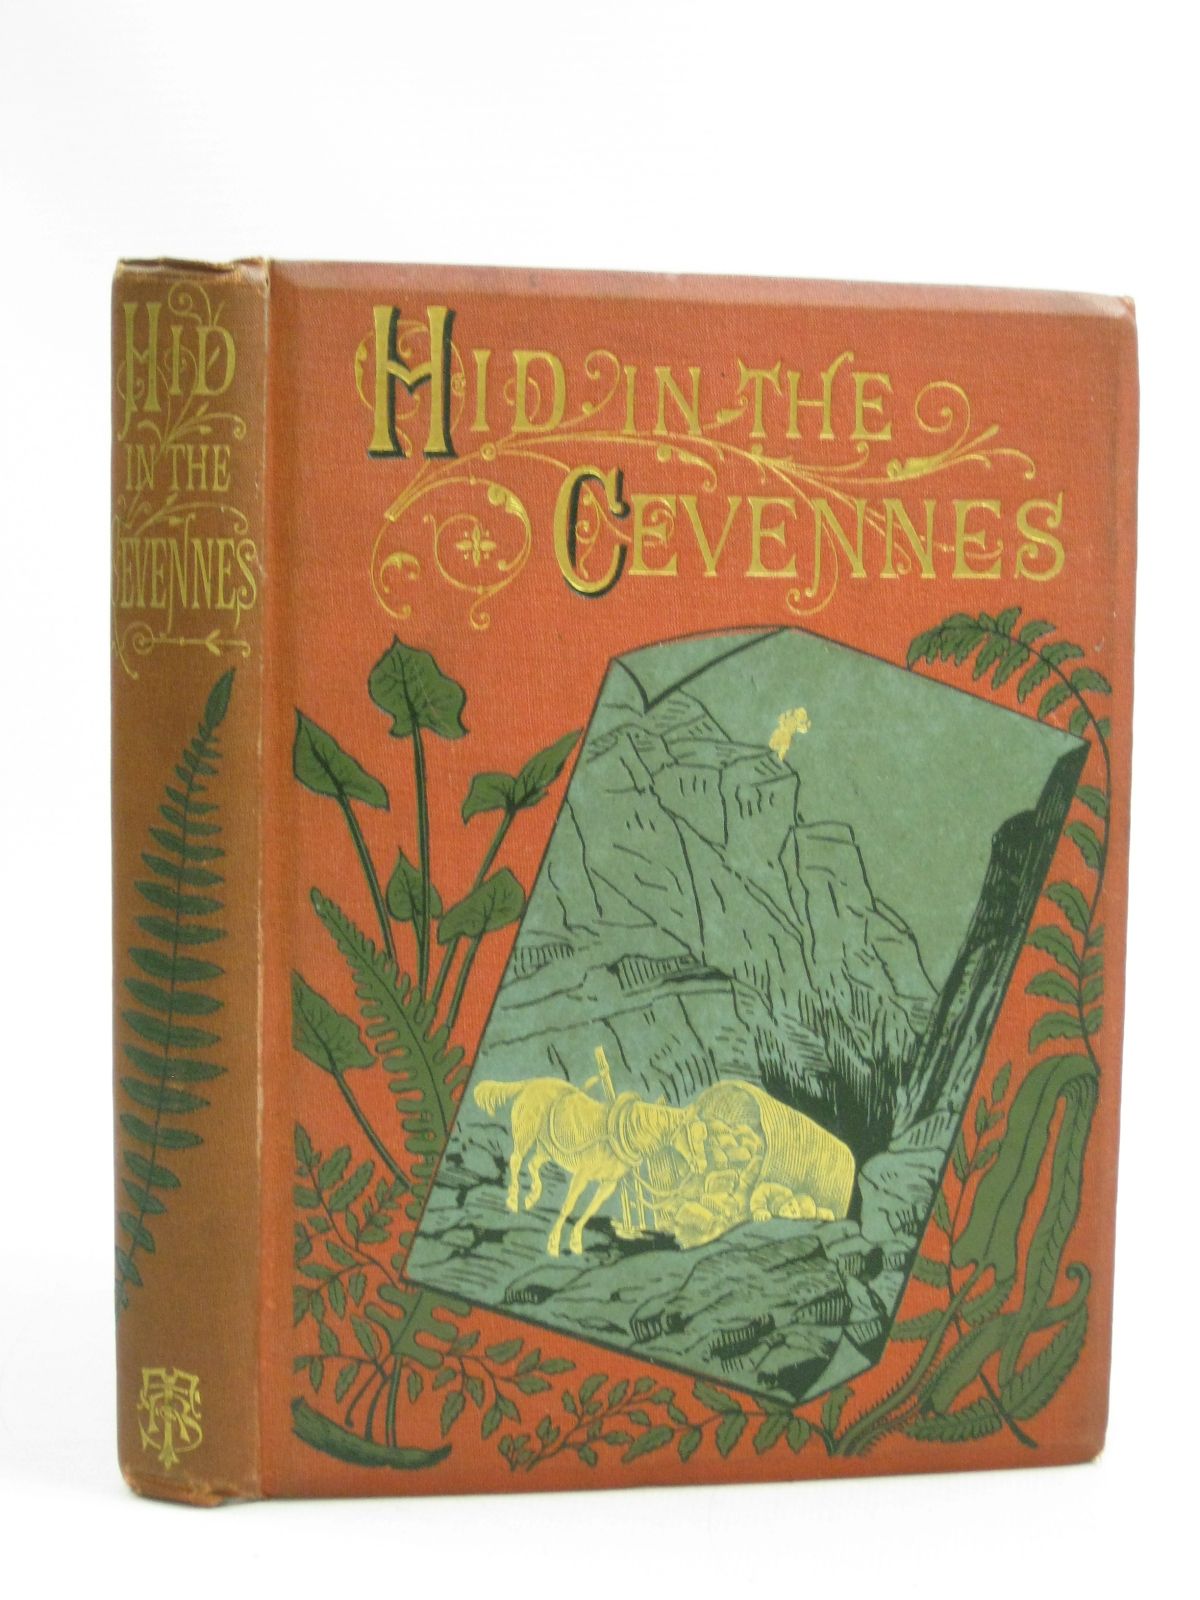 Photo of HID IN THE CEVENNES written by Moggridge, Blanche M. published by The Religious Tract Society (STOCK CODE: 1315046)  for sale by Stella & Rose's Books